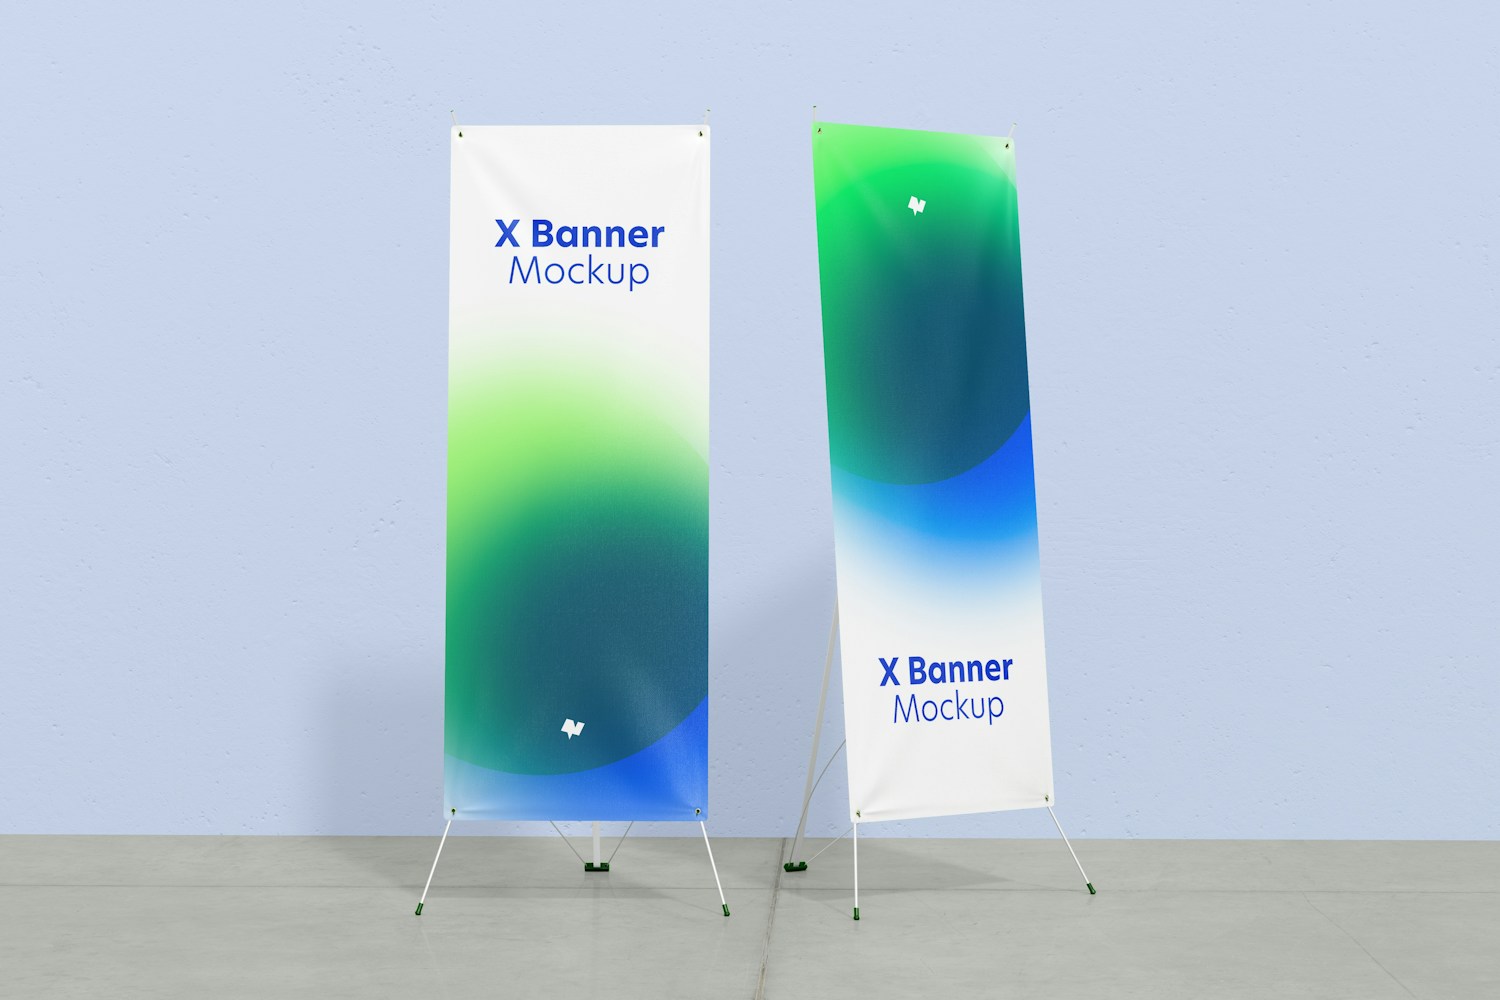 With this mockup you can show your design in both banners!